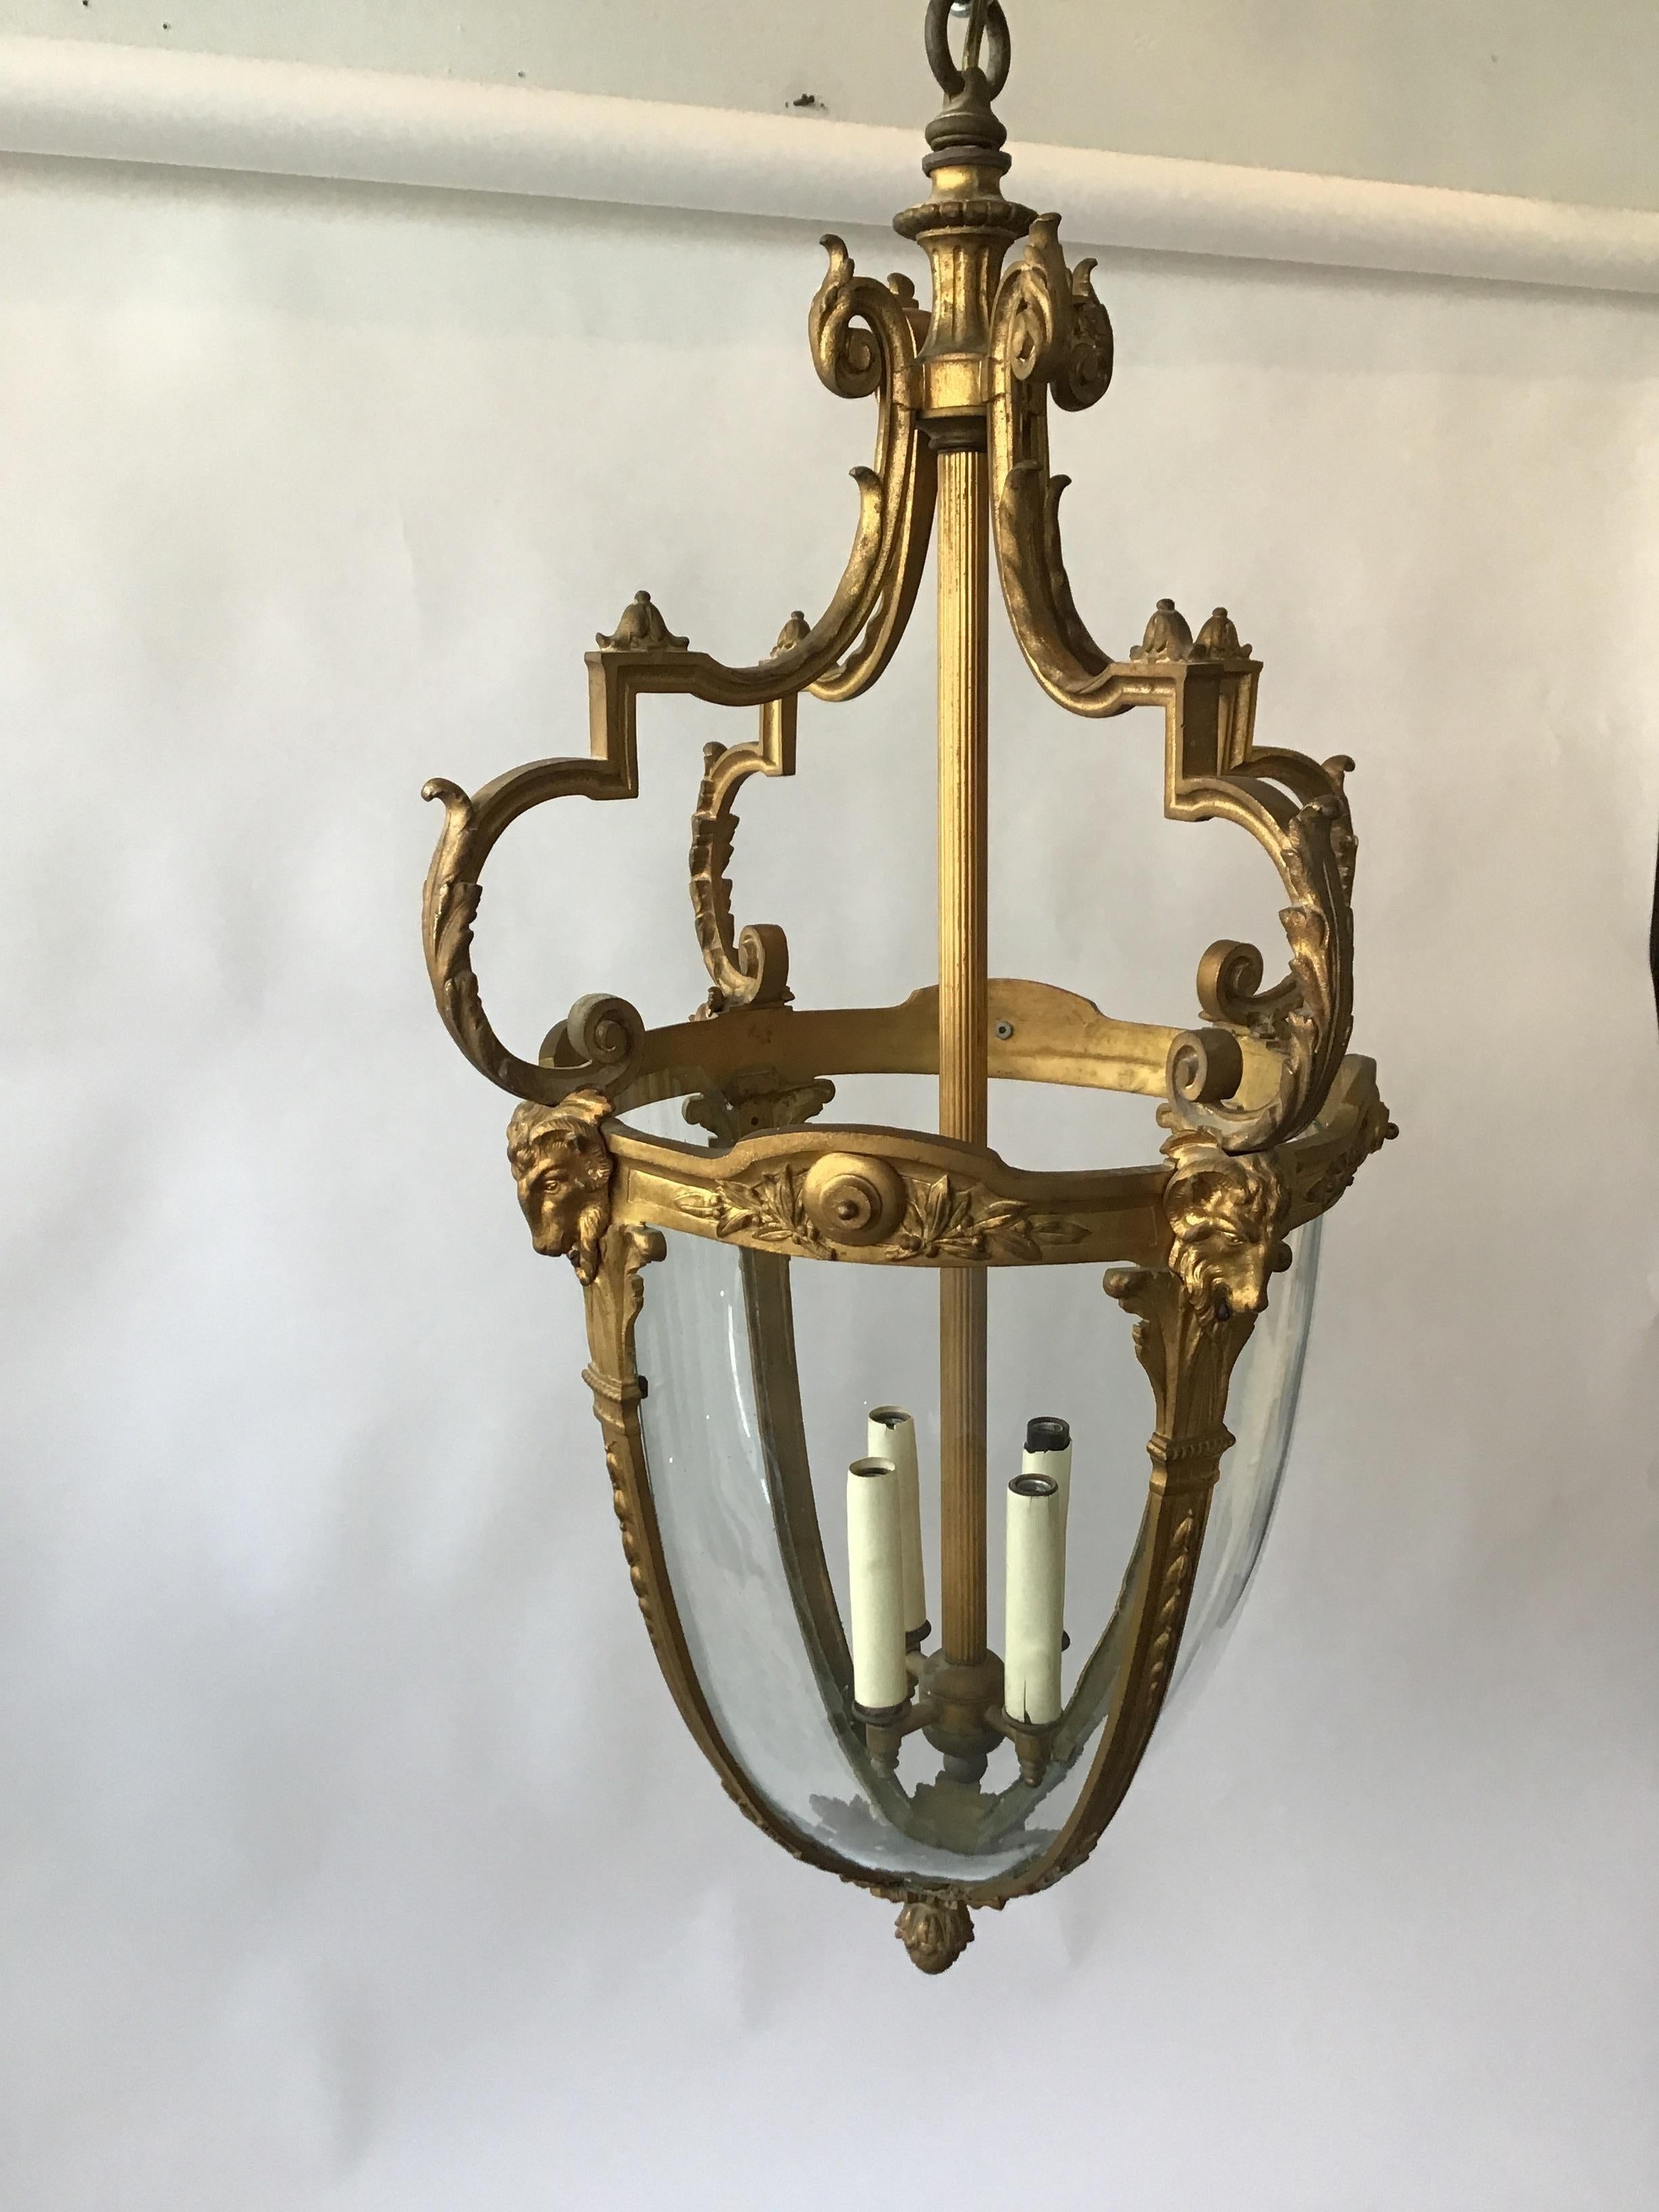 1920s French gilt bronze ram's head lantern. On the large side. One pane of glass is missing. I might have a person who can make one.